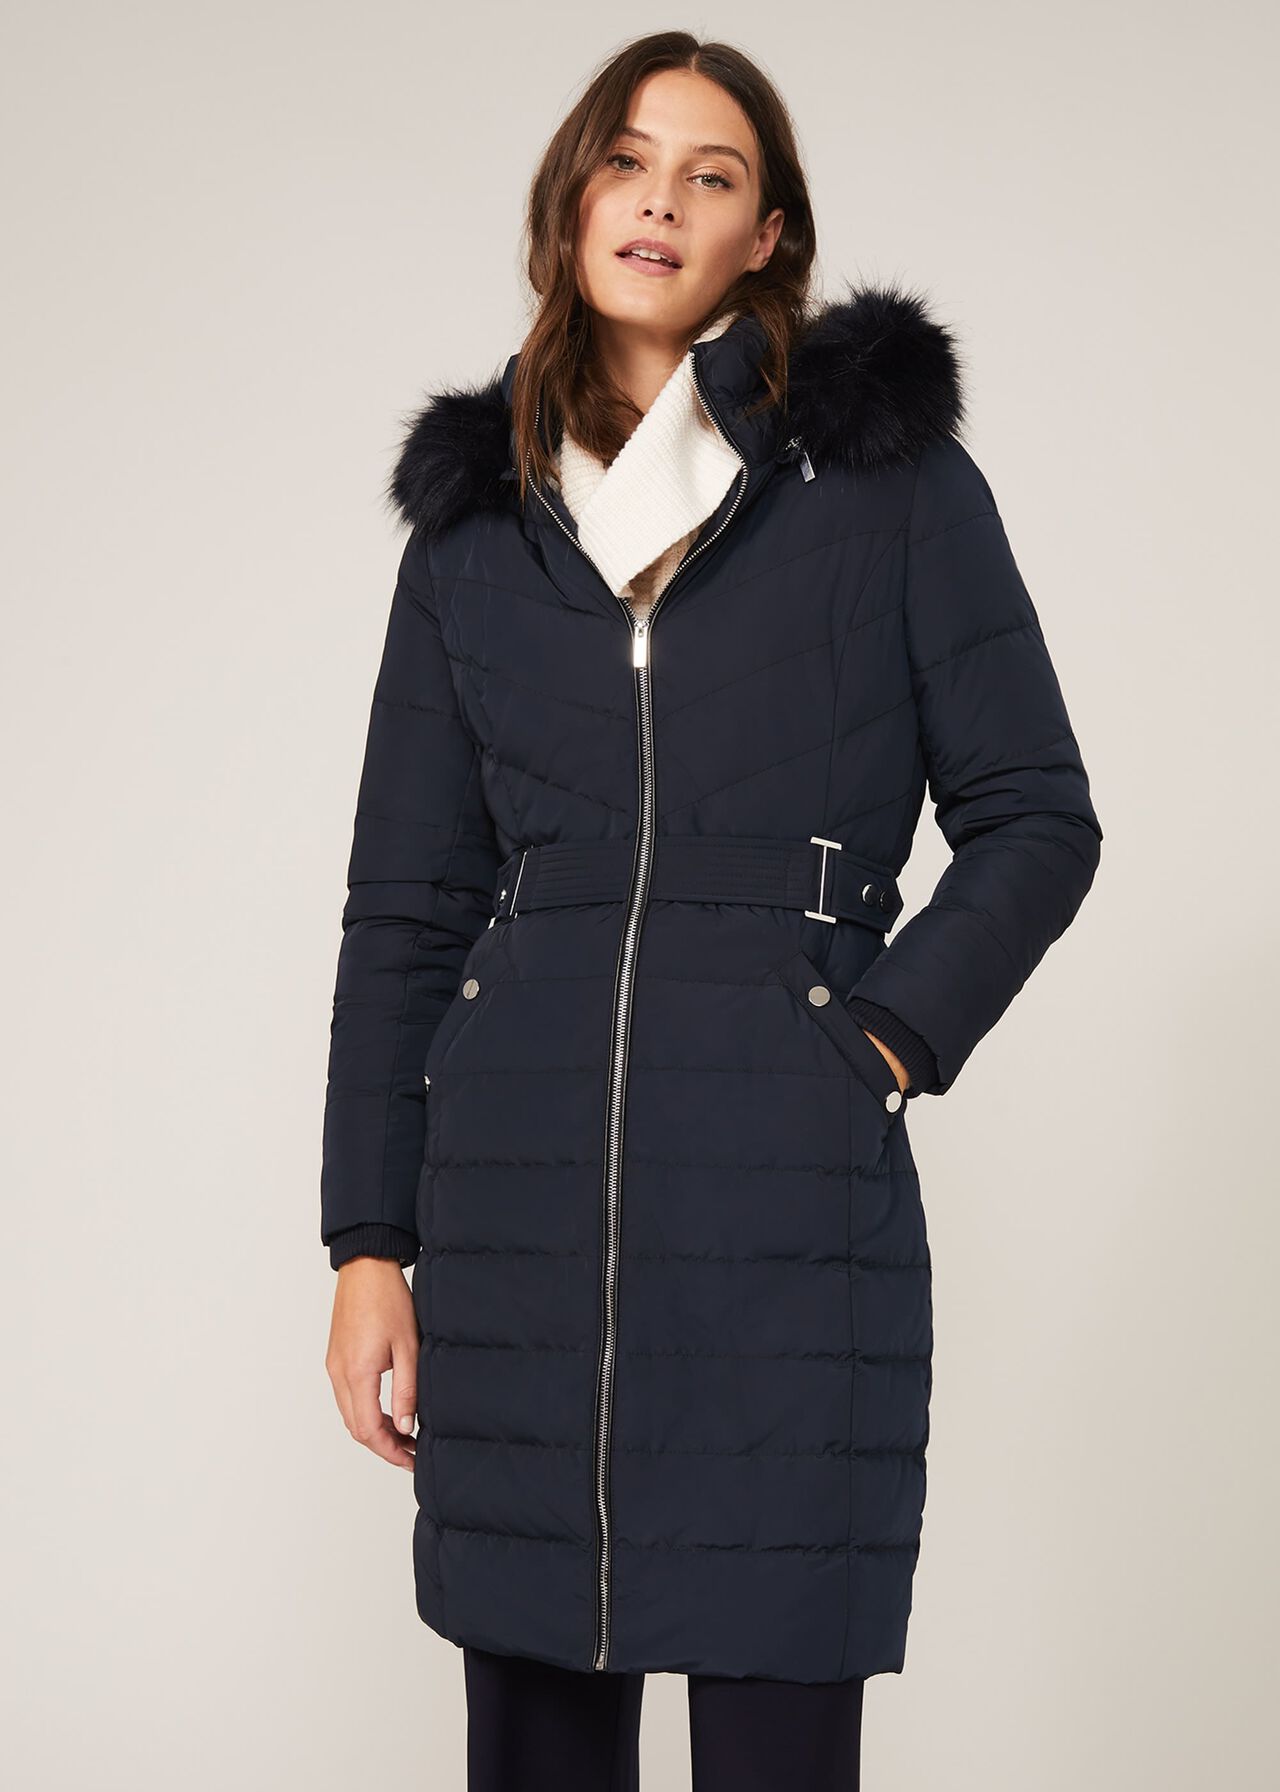 Elouise Buckle Long Puffer Coat | Phase Eight